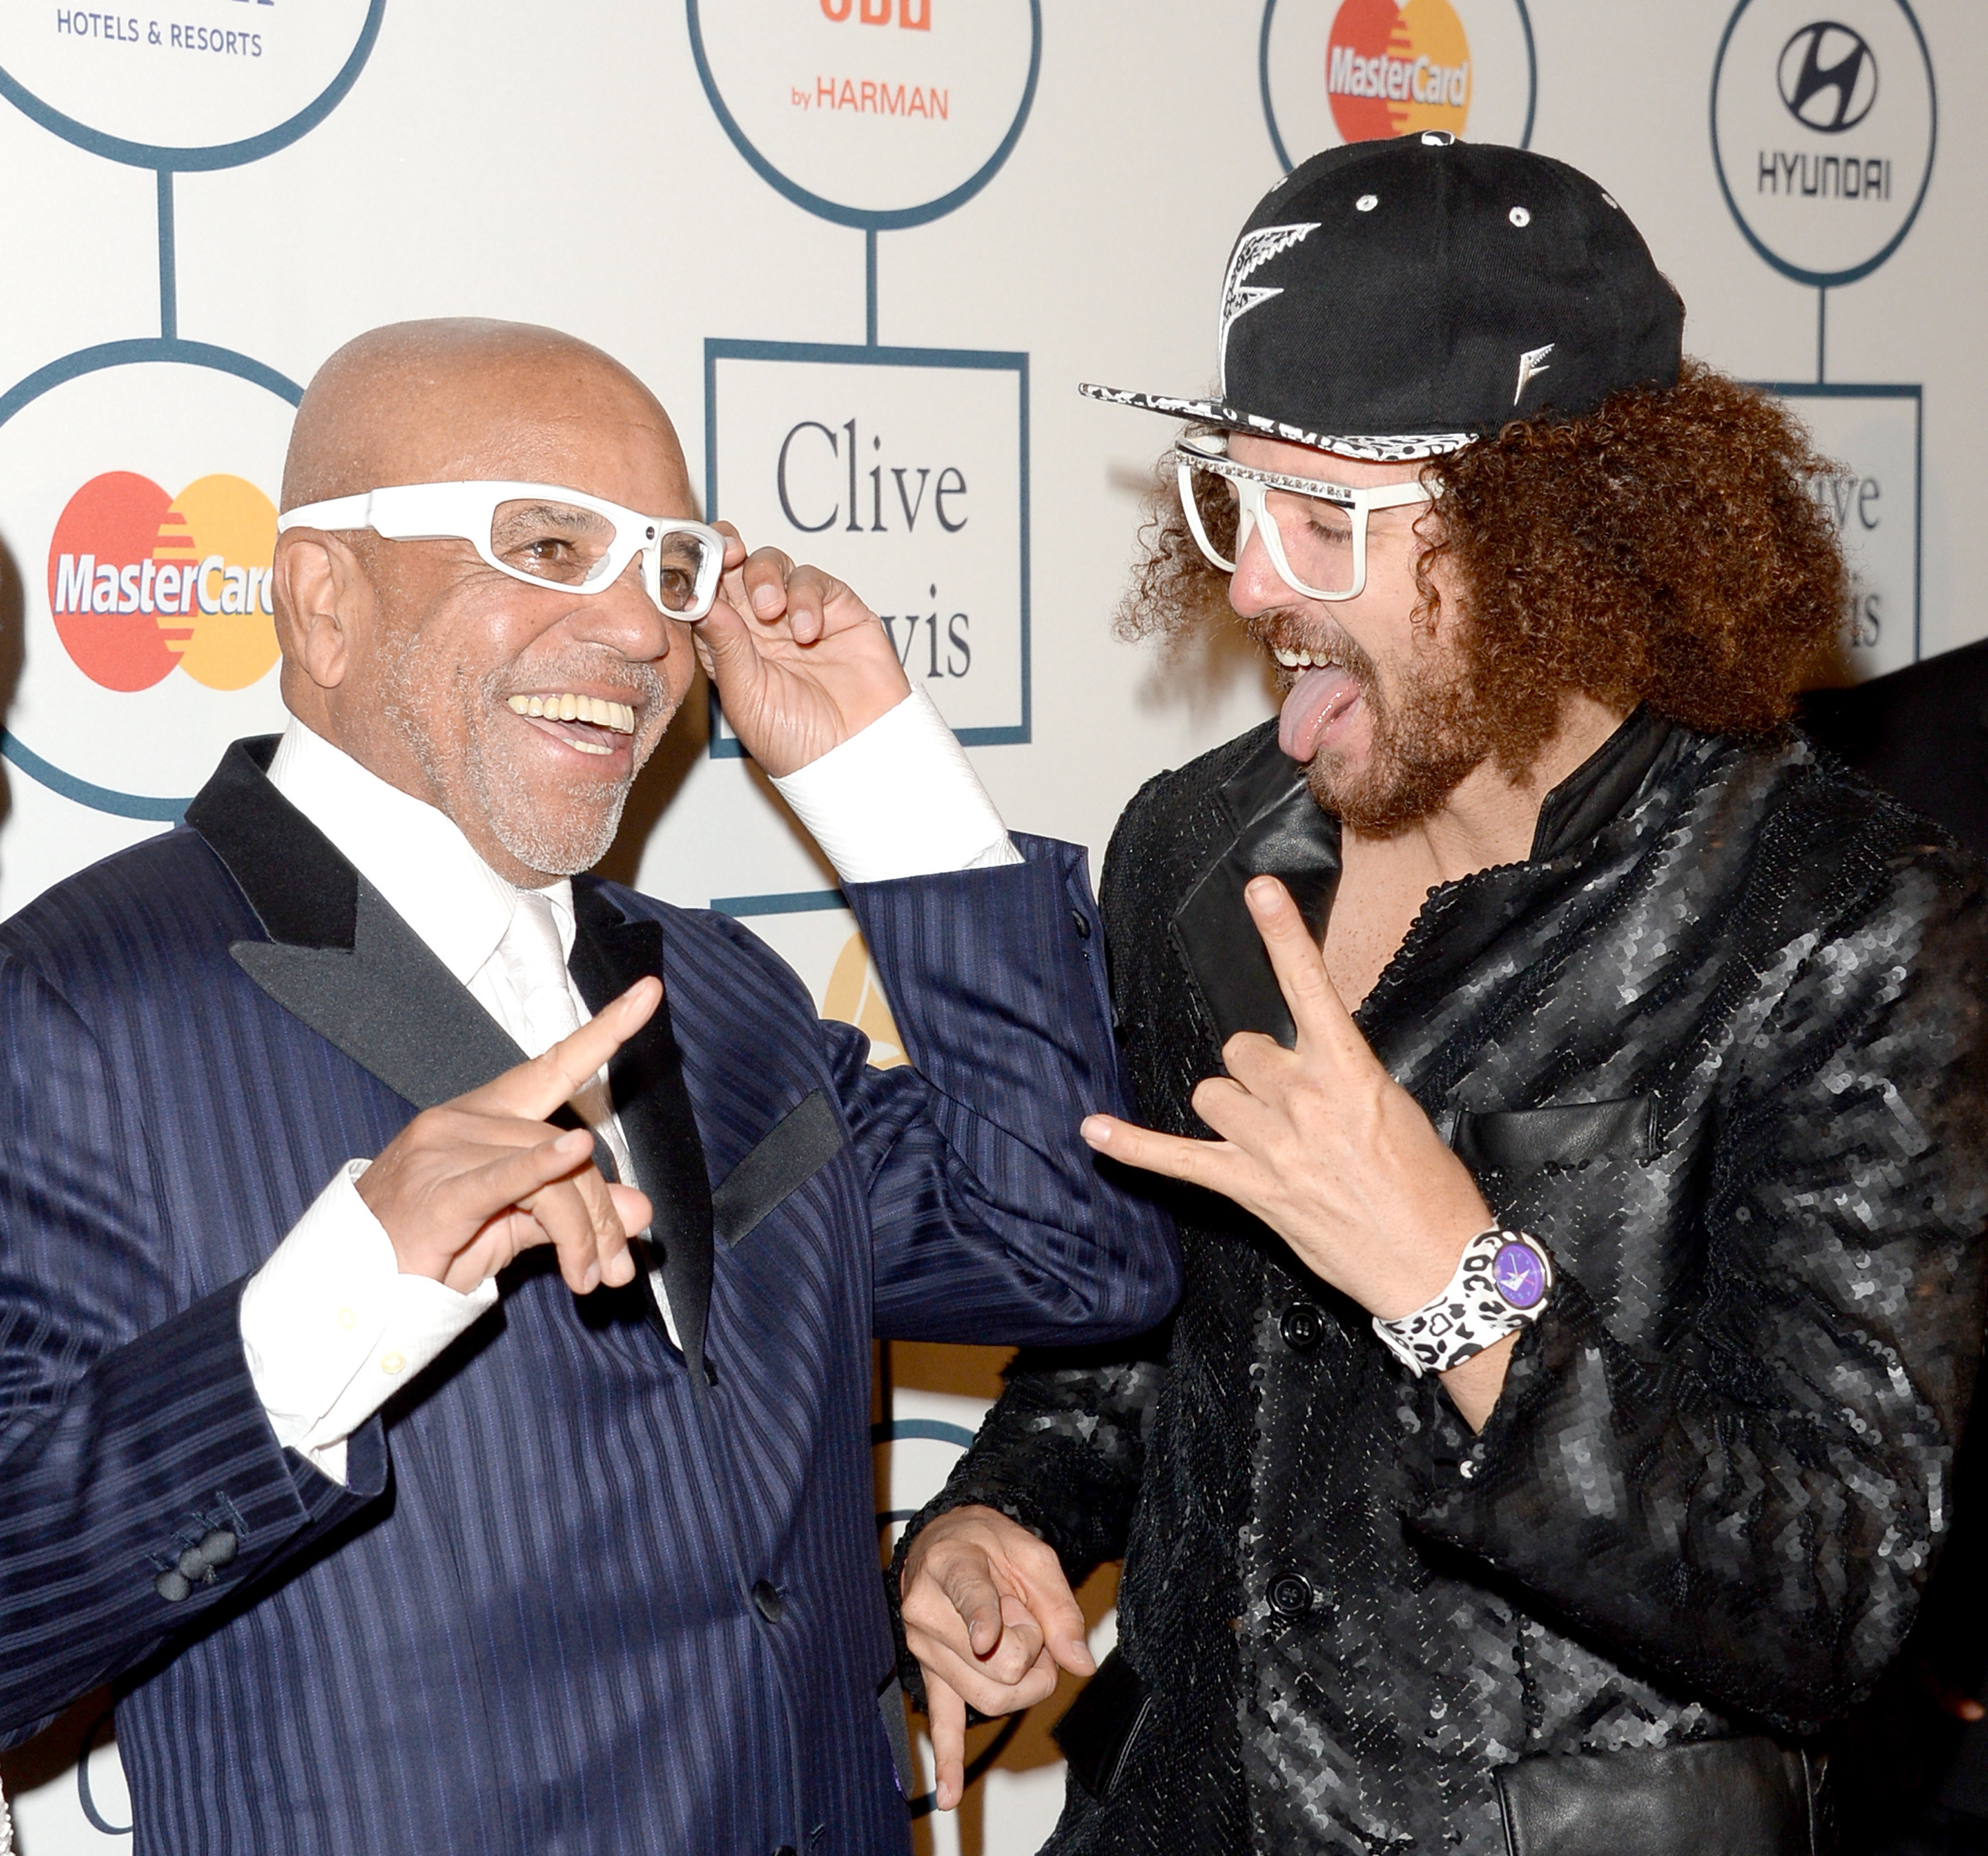 Redfoo and Berry Gordy Jr. smiling and giving hand gestures